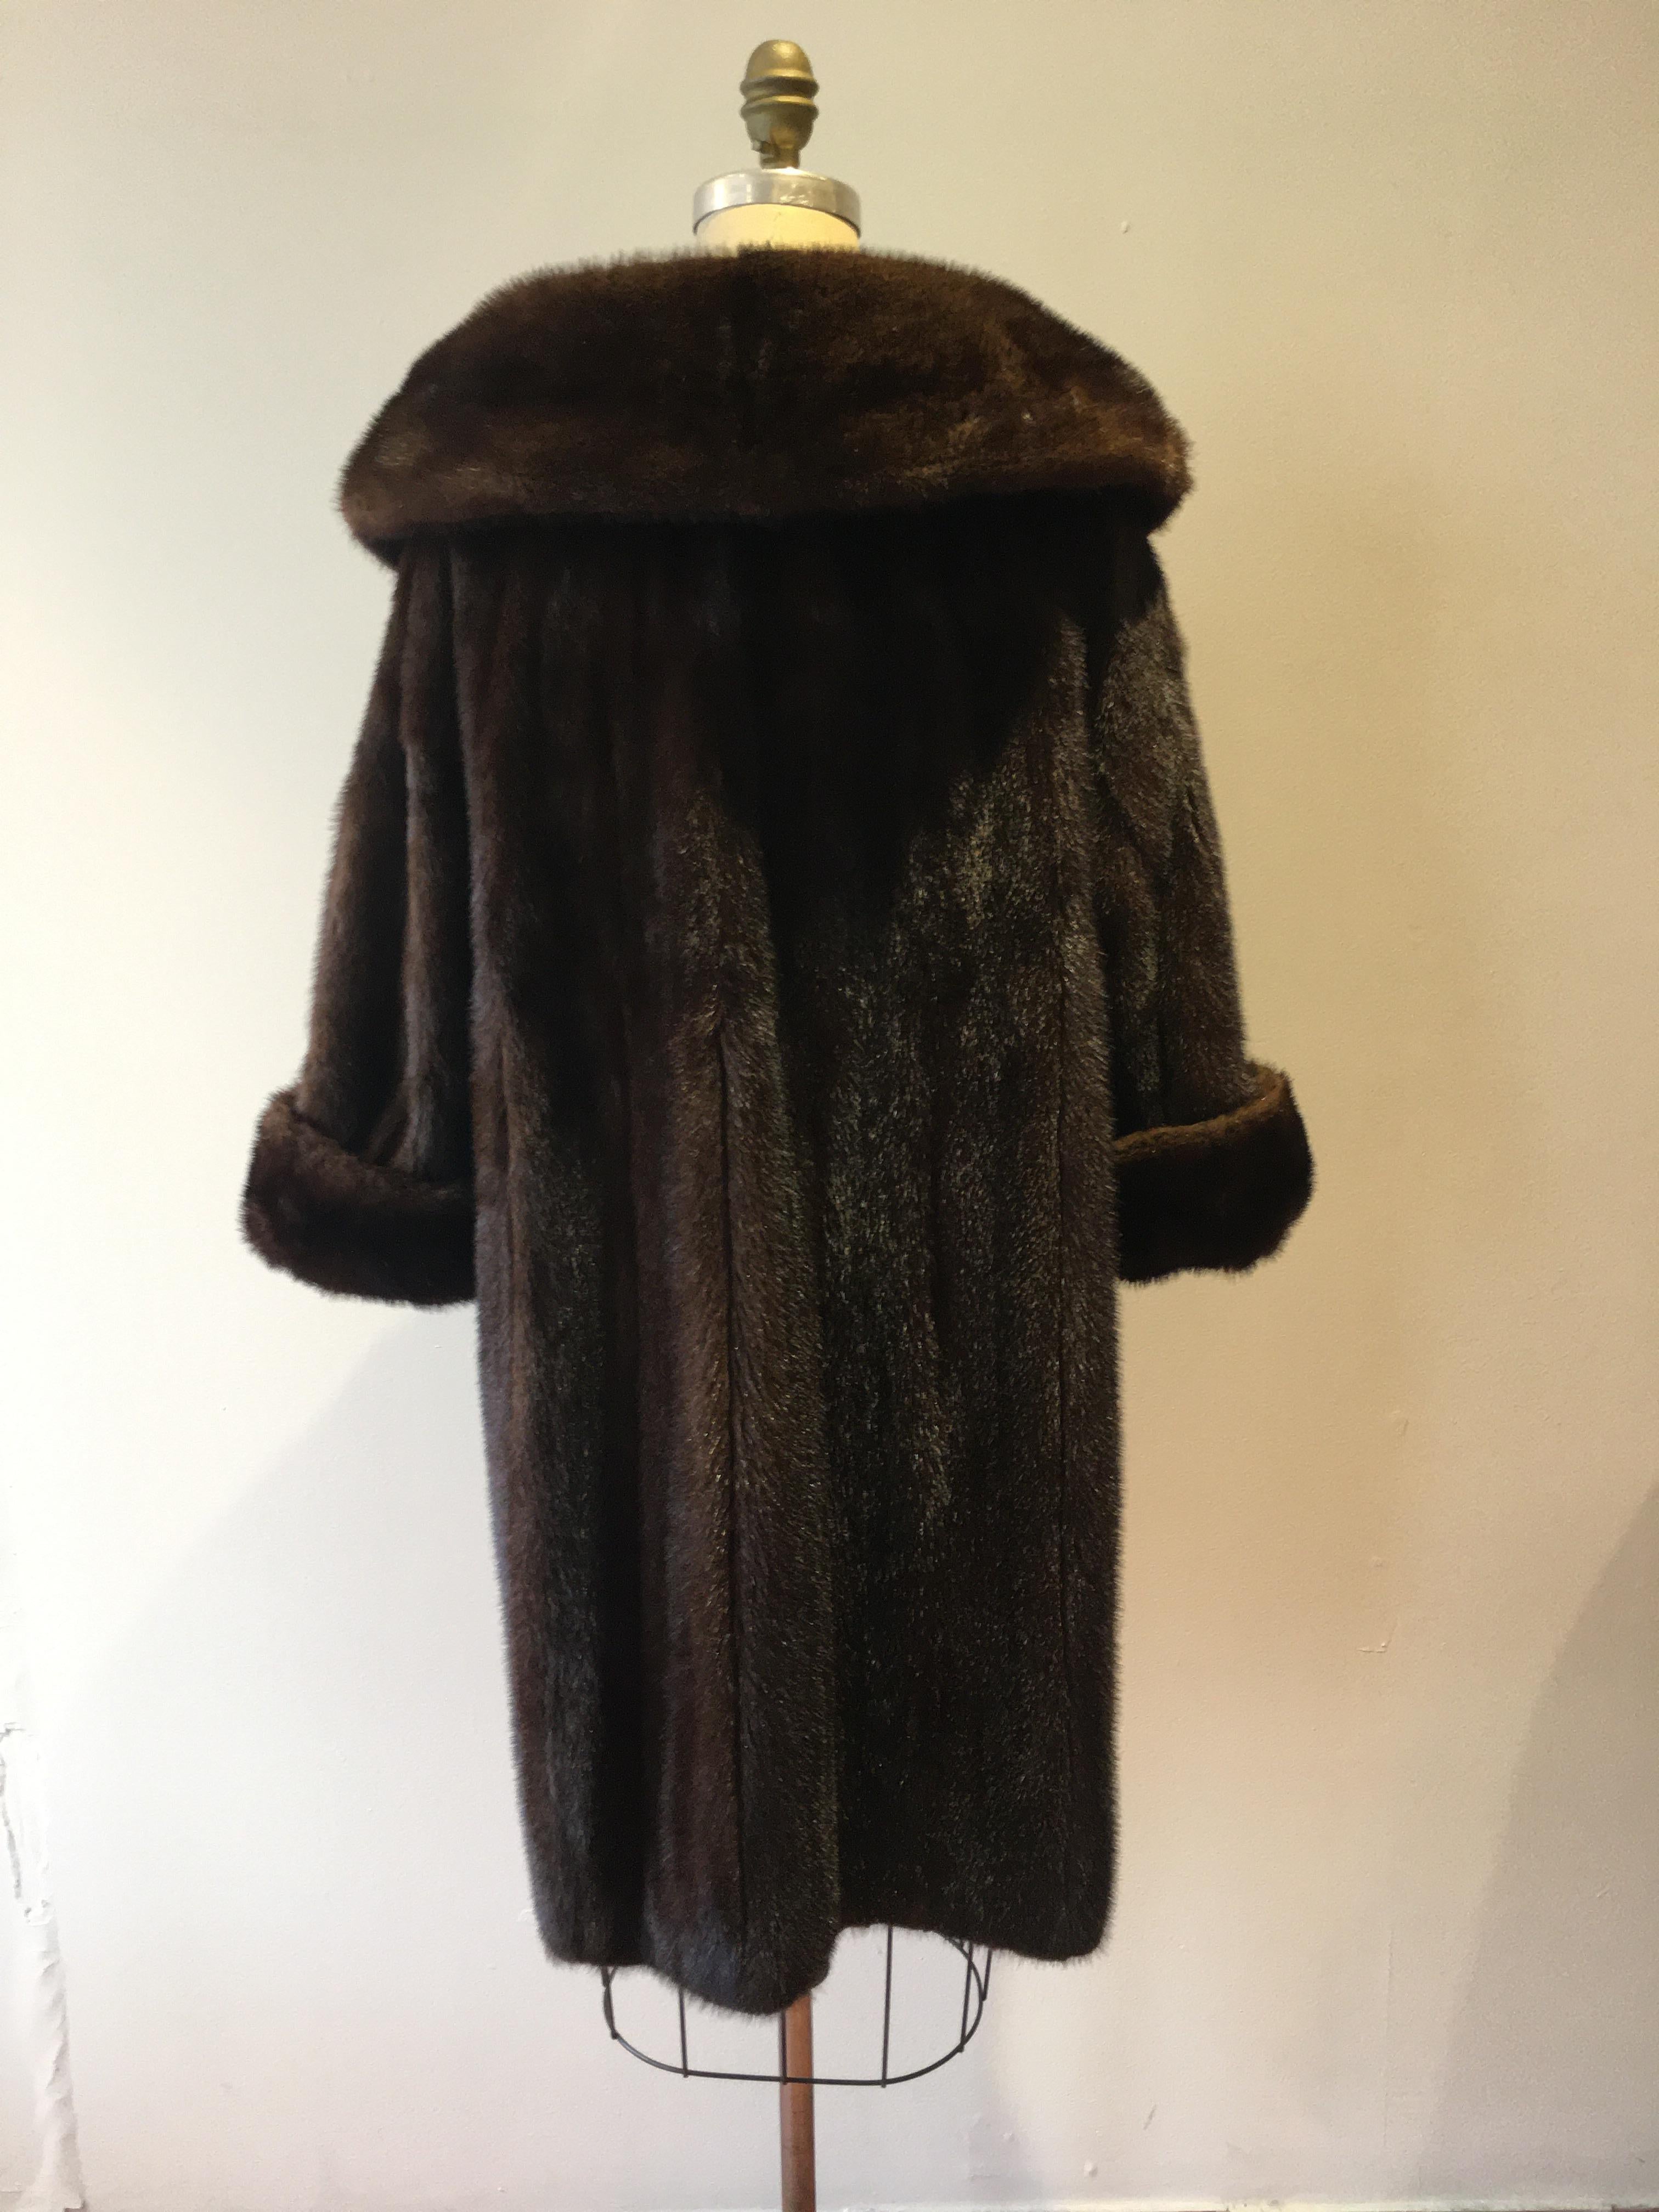 This gorgeous mink coat was designed by Christian Dior for Holt Renfrew. It is in great vintage condition, nice and glossy and still in style. It has a lovely shawl collar; turned up cuffs and pockets, as well as lining silk ties at the waist.